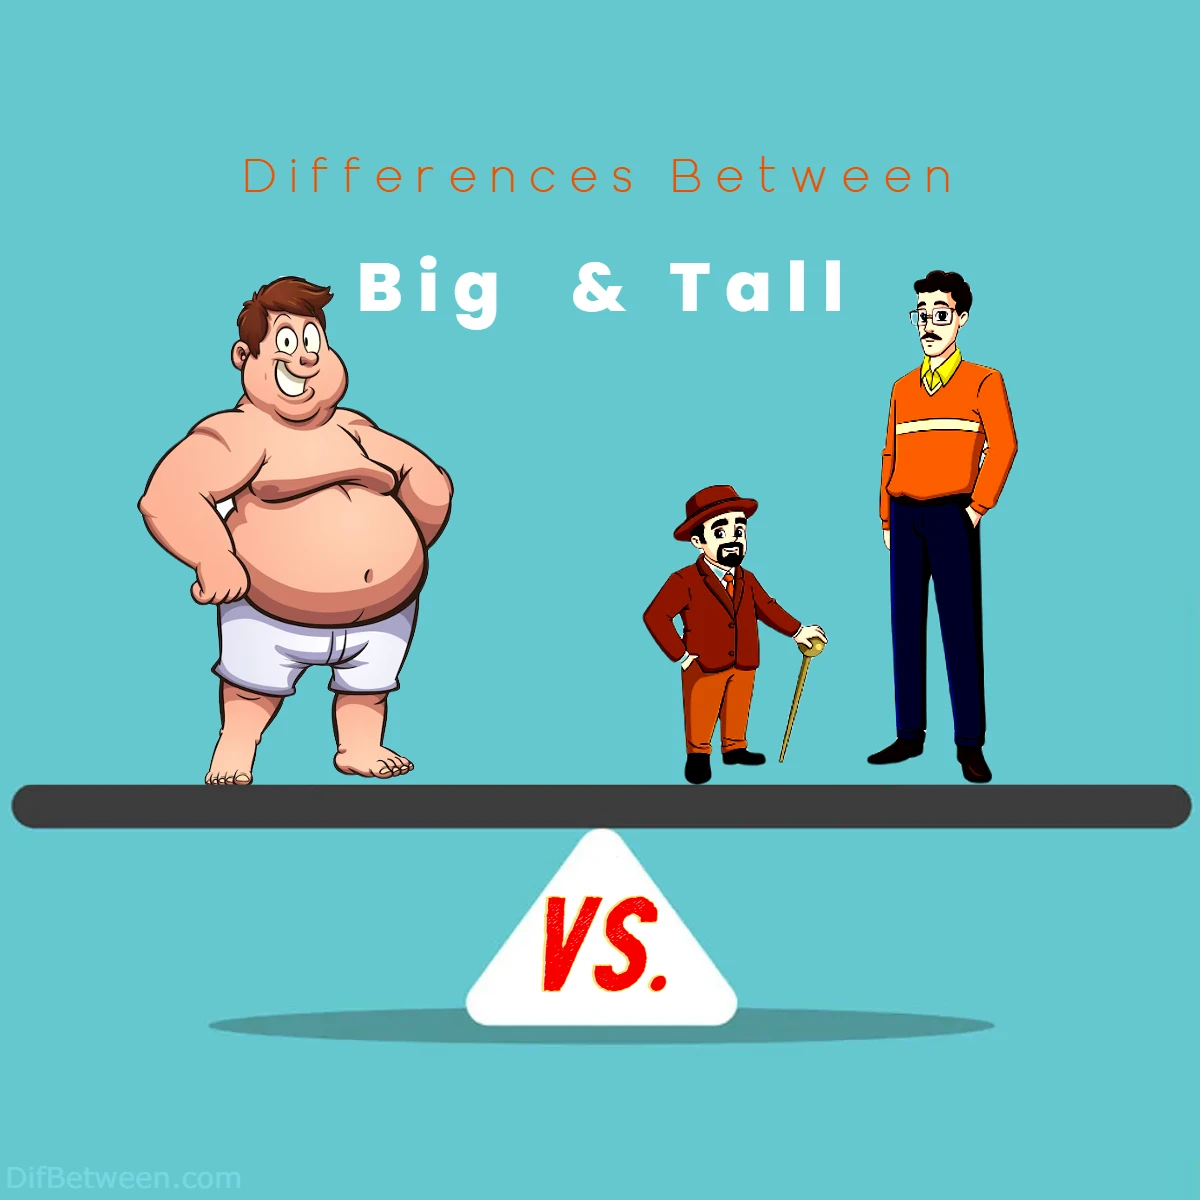 Differences Between Big vs Tall